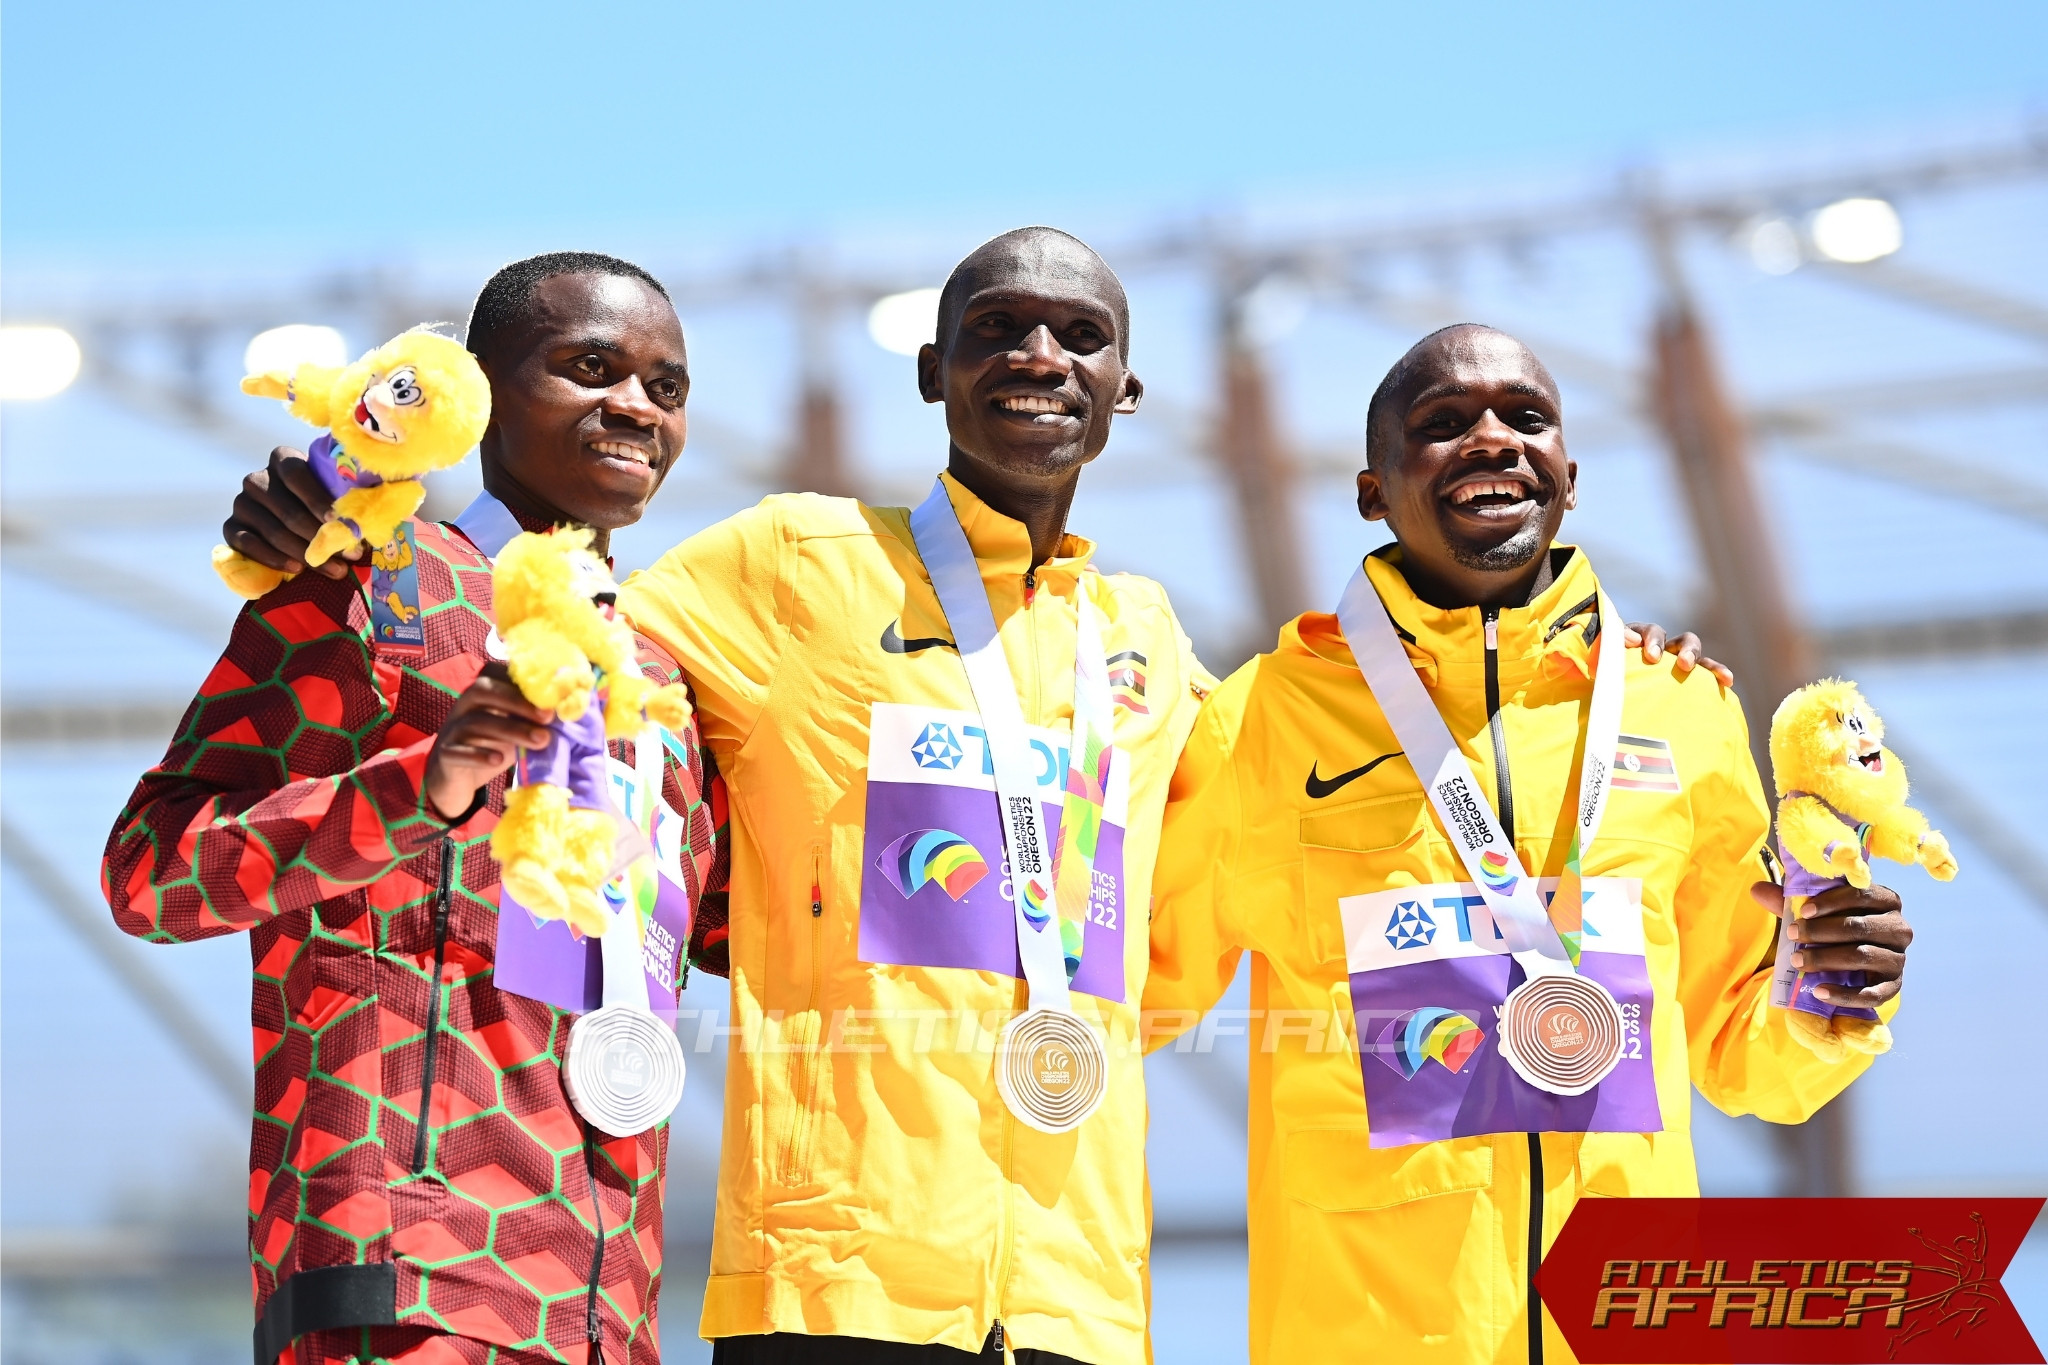 Ugandan Joshua Cheptegei wins gold in men's 10,000m at the World Athletics Championships in Oregon 22 / Photo credit: Getty Images for World Athletics